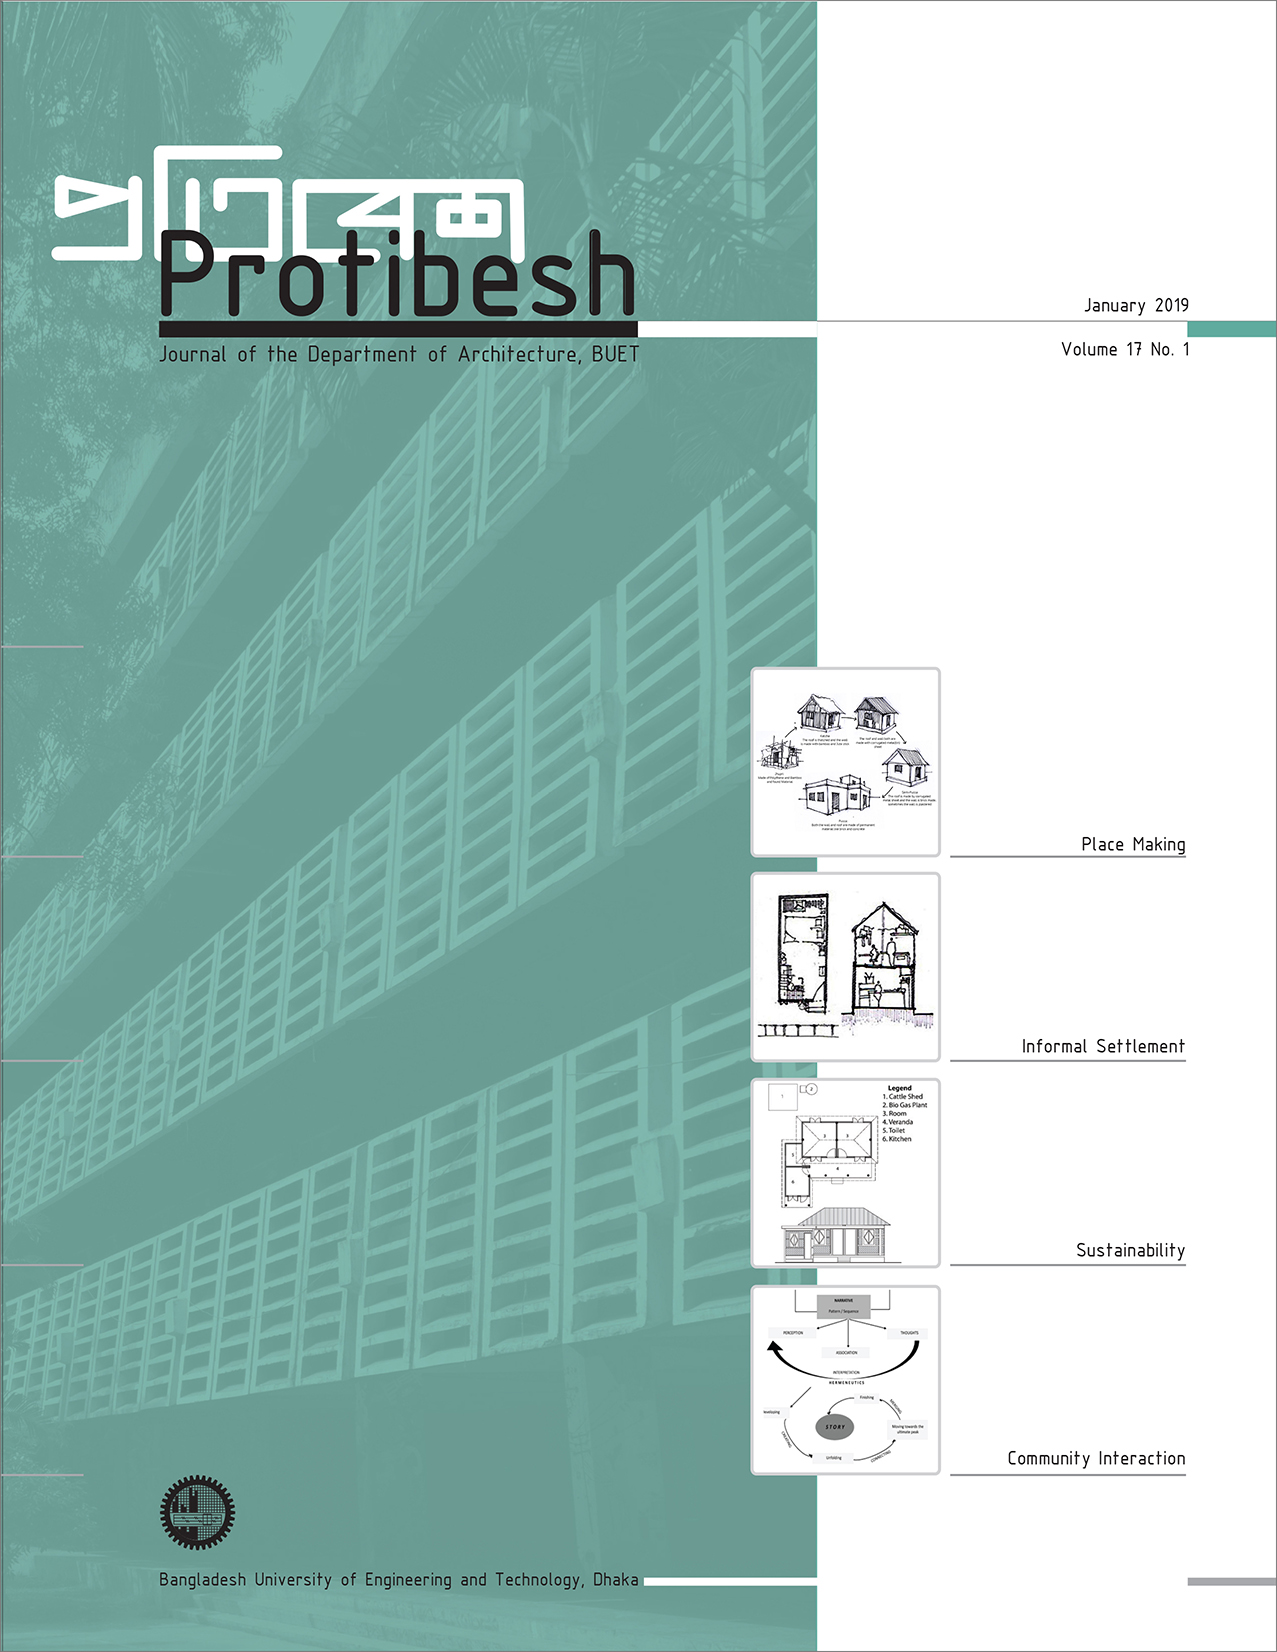 Cover page of Protibesh—Journal of the Department of Architecture, BUET. Volume 17, Number 1, January 2019.